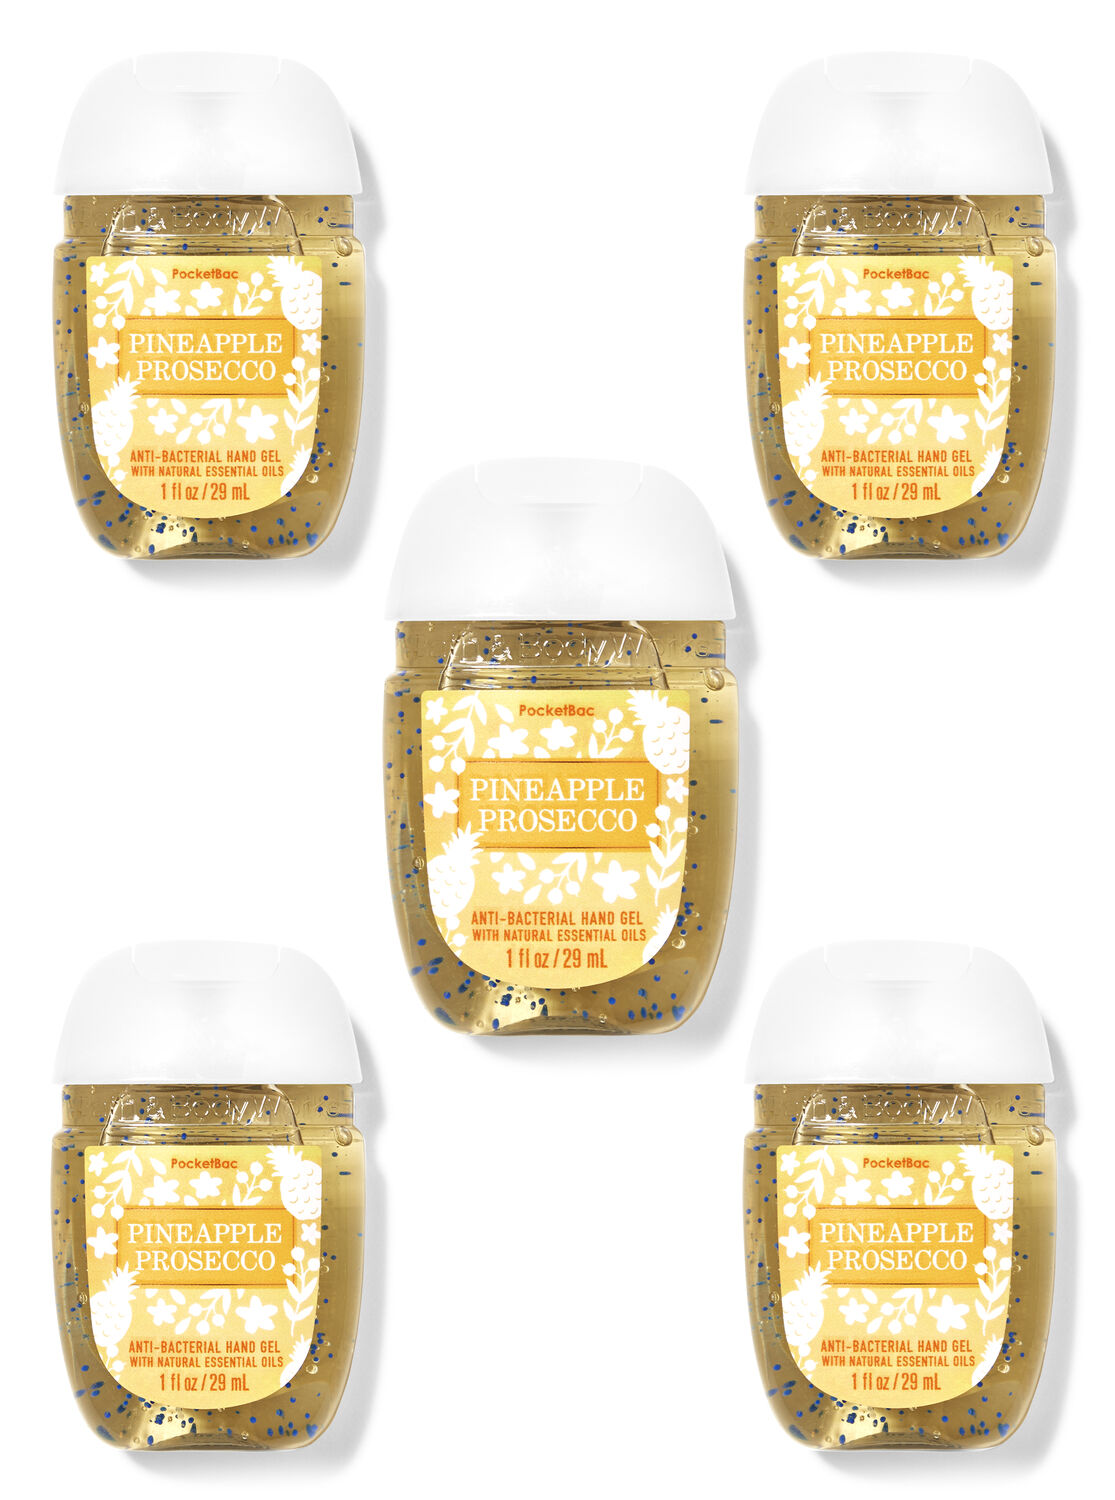 Pineapple Prosecco PocketBac Hand Sanitizers, 5-Pack